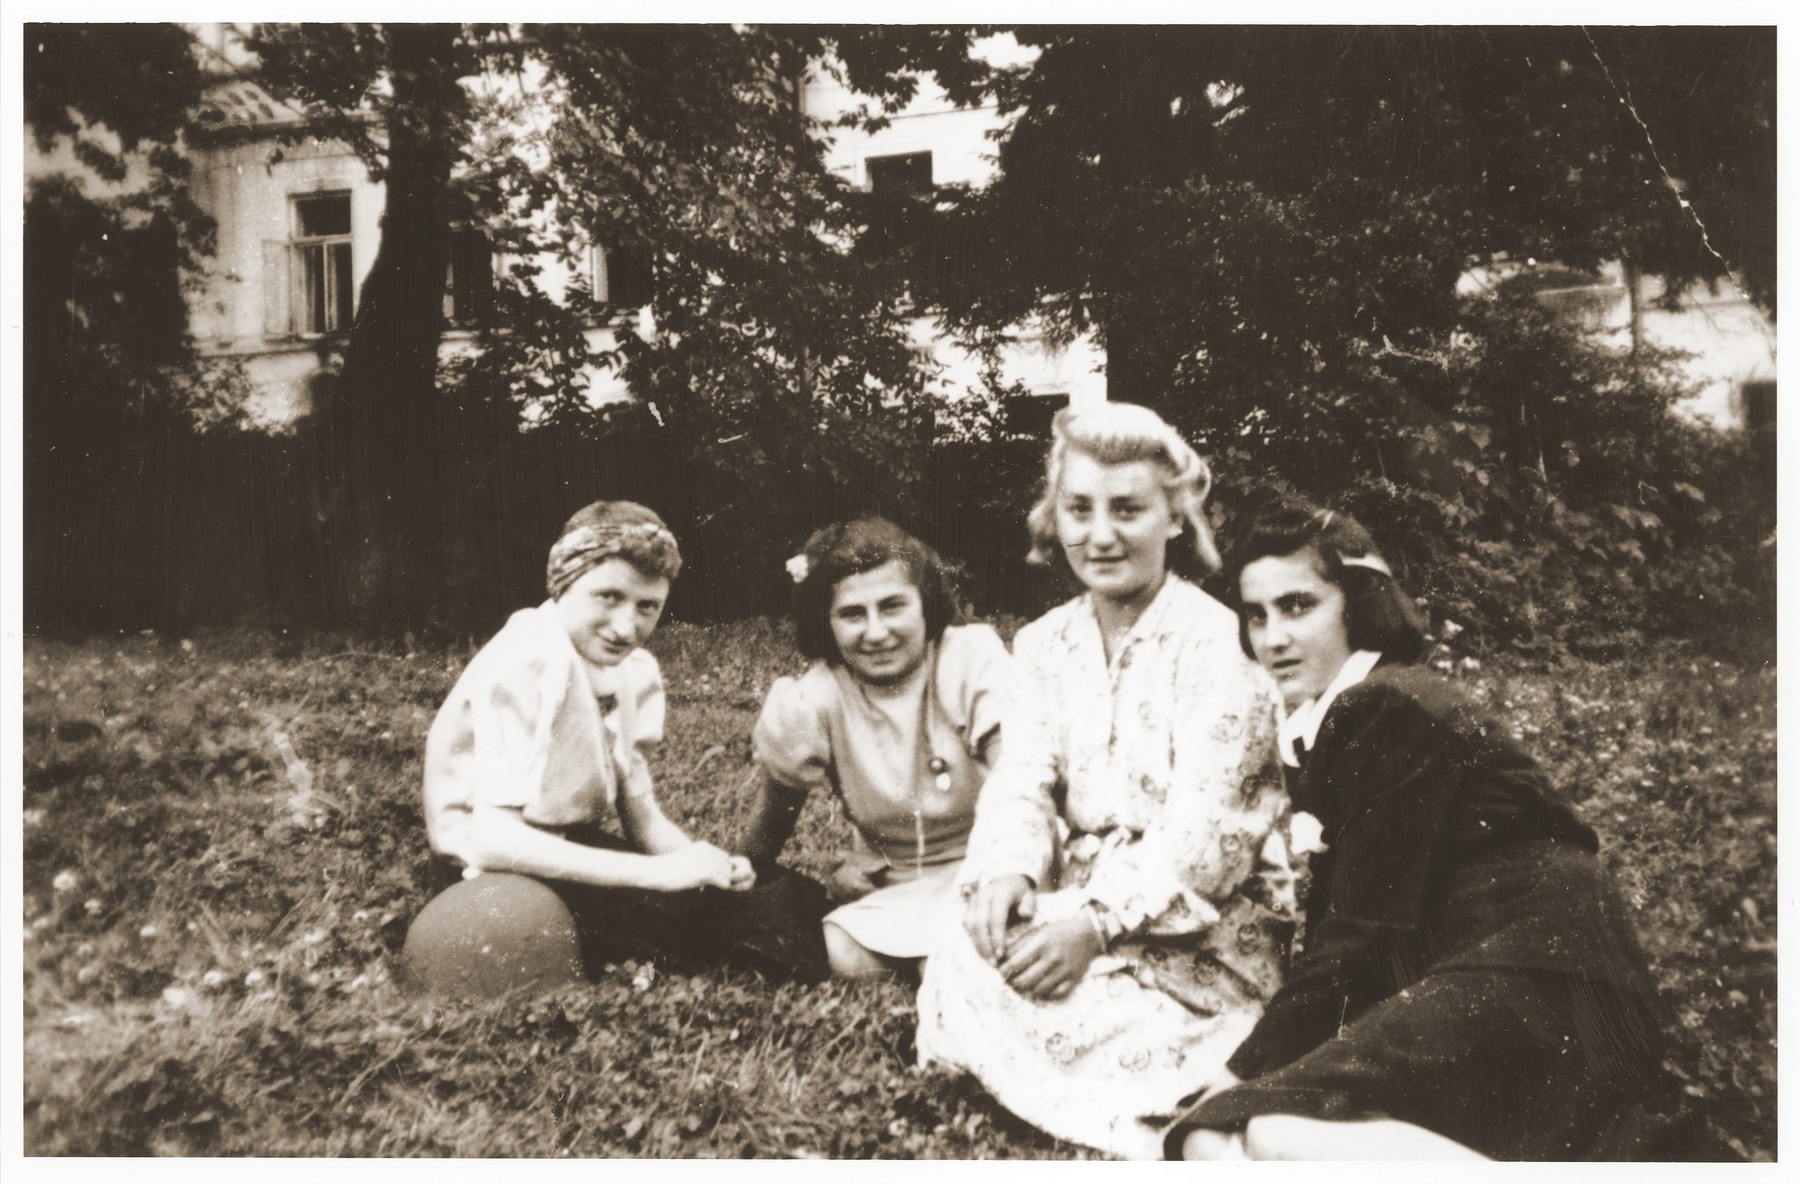 Four survivors of the 500 kilometer. death march that ended in Volary.  These Jewish survivors are recuperating in Prachatice, near Volary.  

Pictured from left to right are: Hela Malnowicer Bleeman, Helina Goldberg Kleiner, unknown, and Lilka Haber Silbiger.